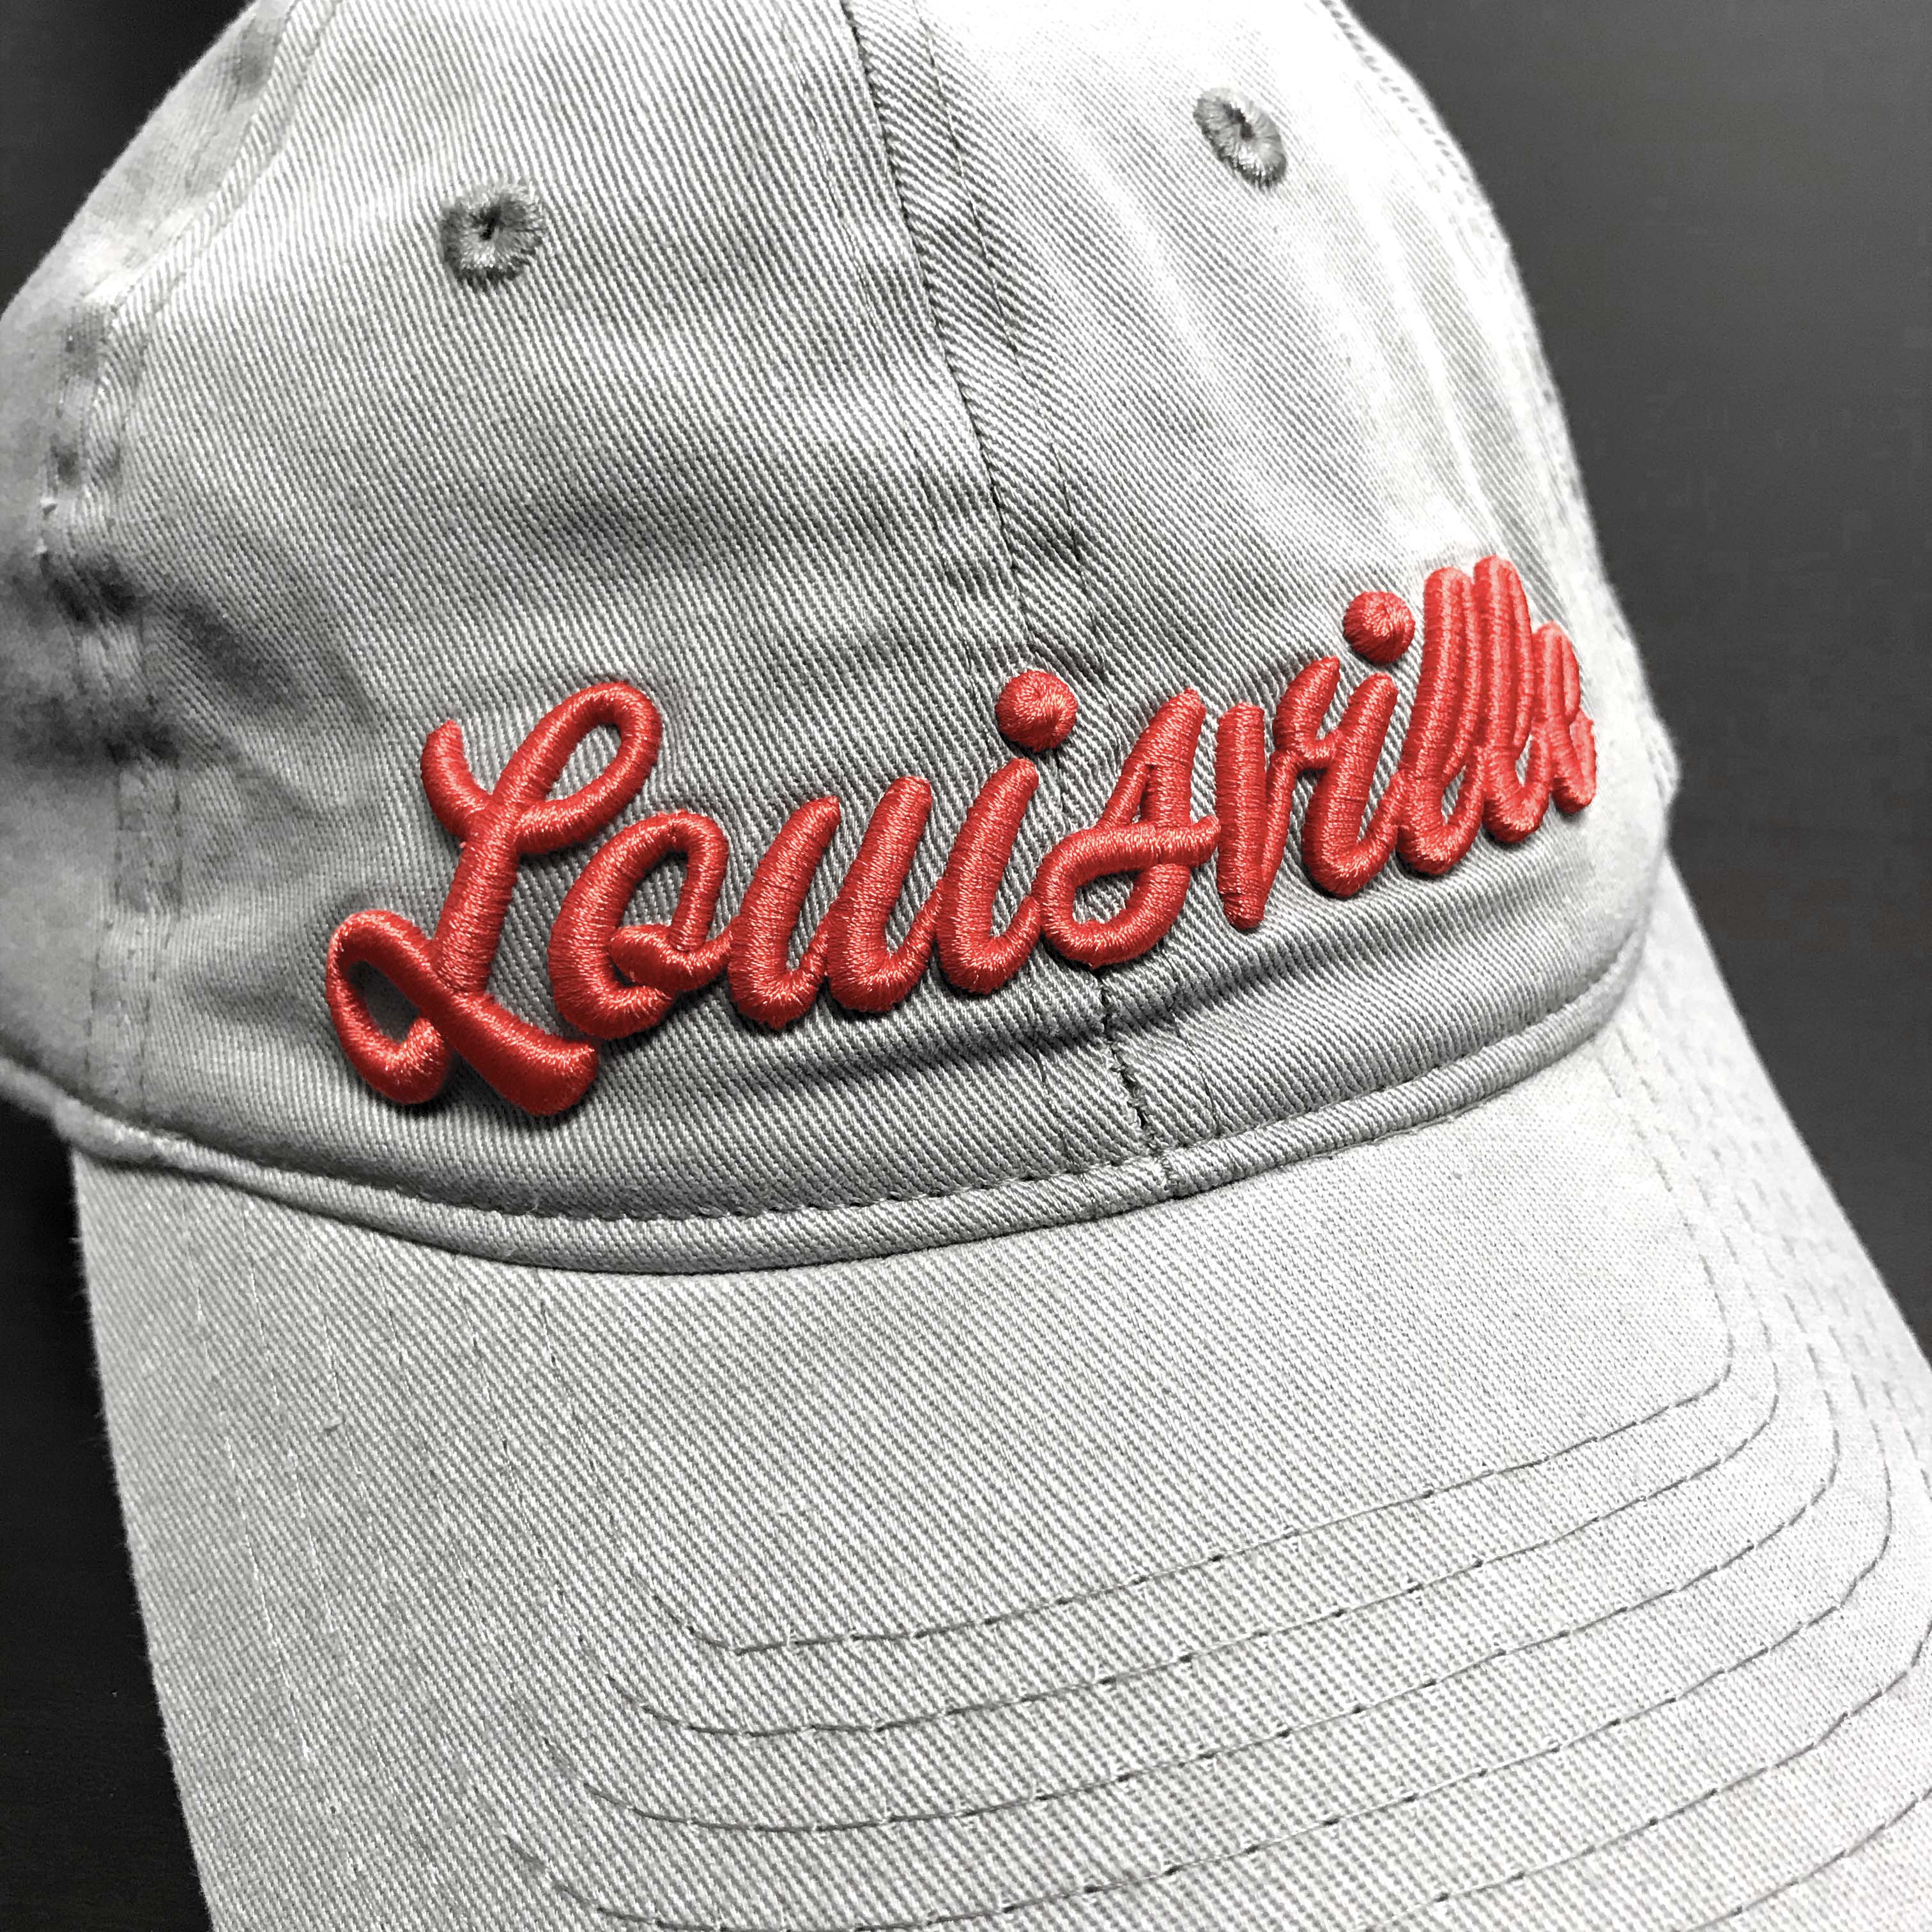 Louisville embroidered gray baseball hat.